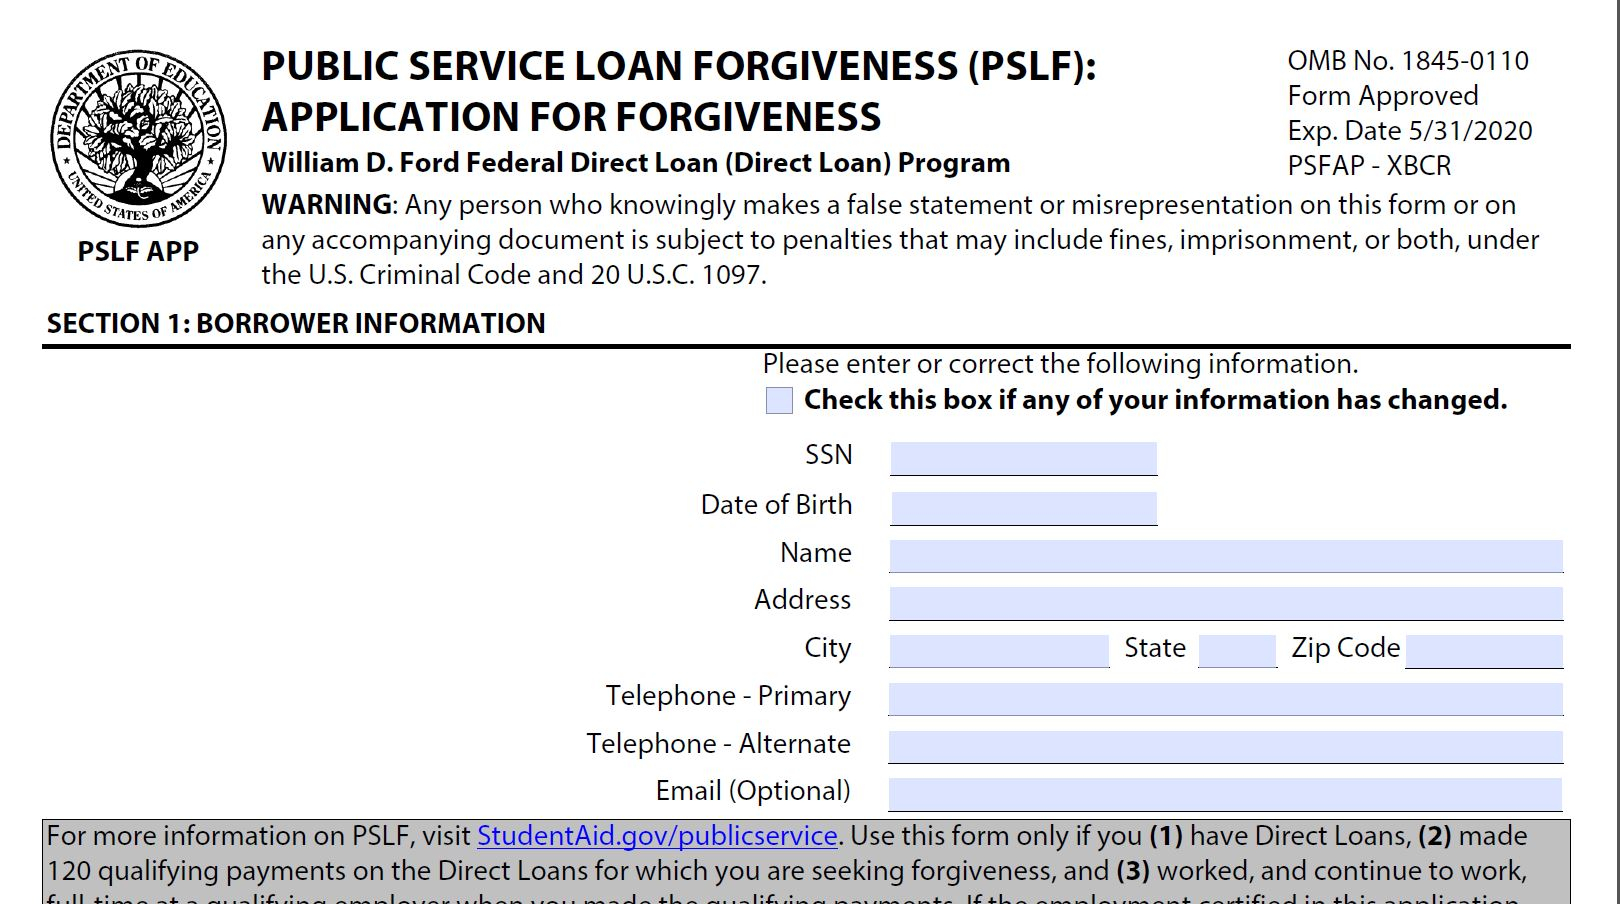 Do Loans Have To Be Consolidated For PSLF